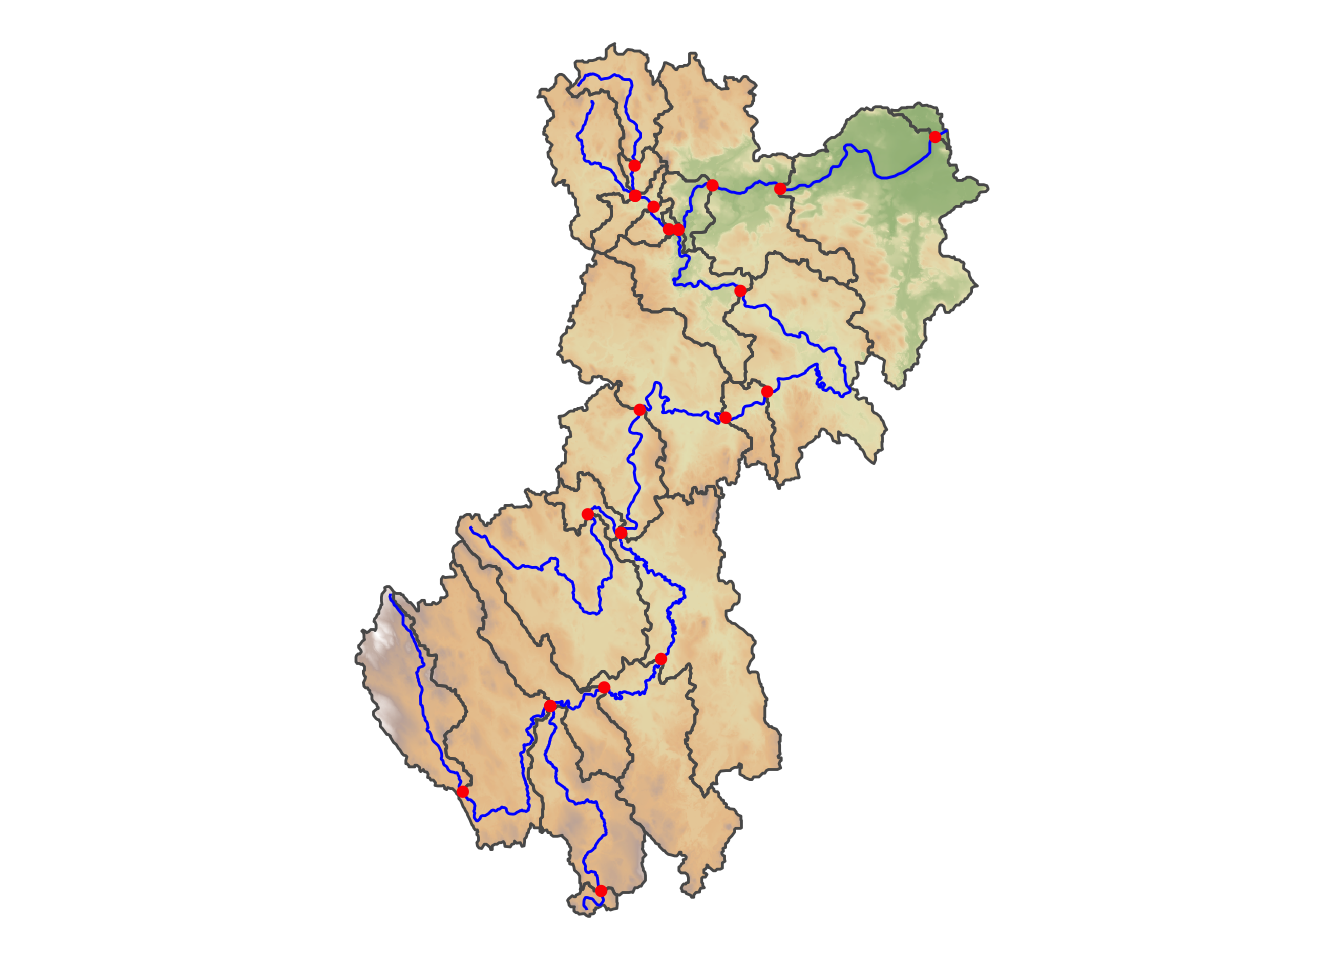 An idealized map showing catchment divide polygons, connected river lines, and points along rivers at the inlet and outlet of catchments.